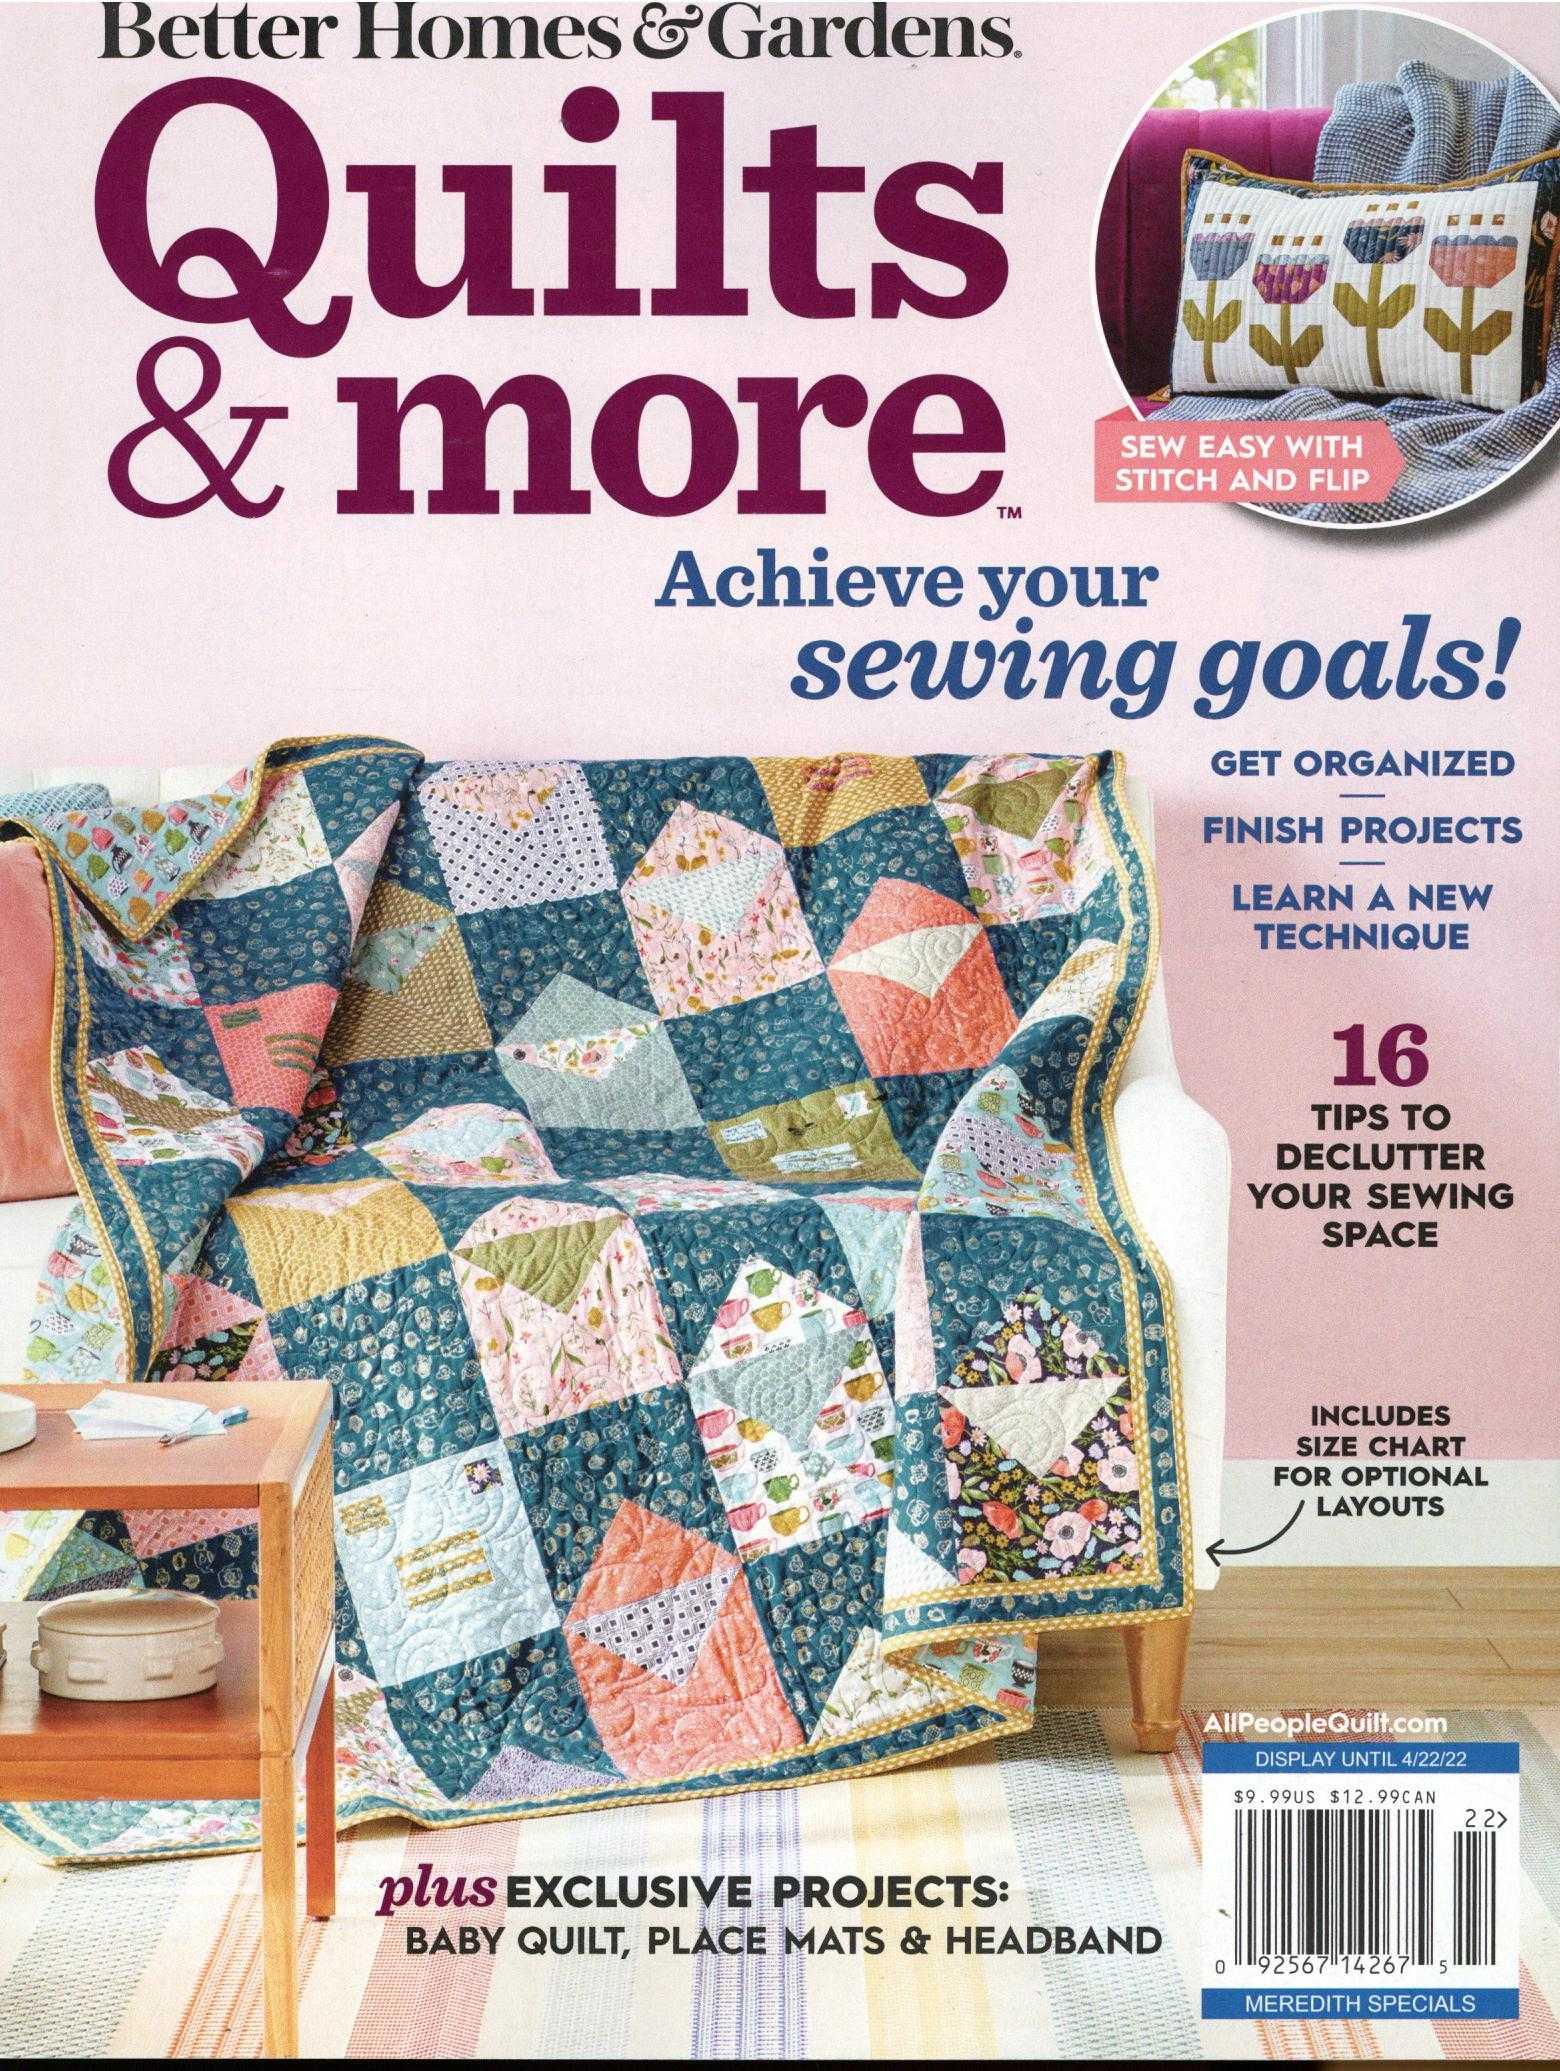 BHG Quilts & more